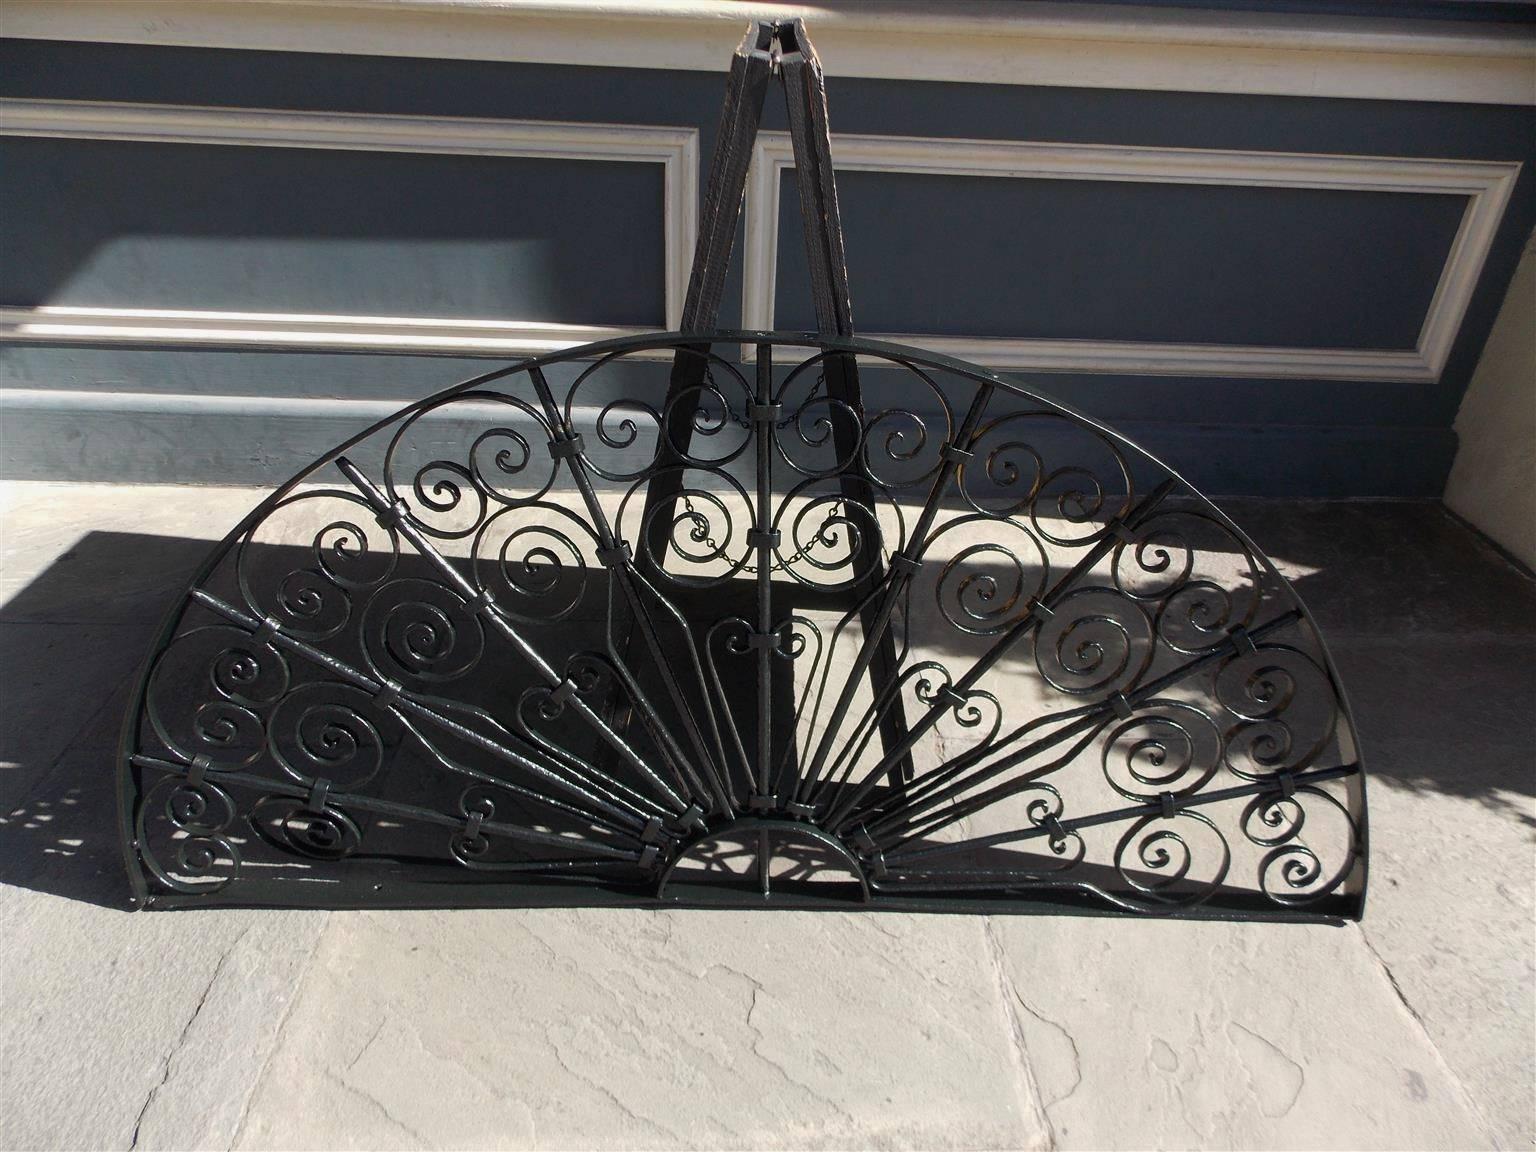 American wrought iron demi-lune ten panel window transom / gate with pleasing decorative scroll work motif.  Early 19th Century